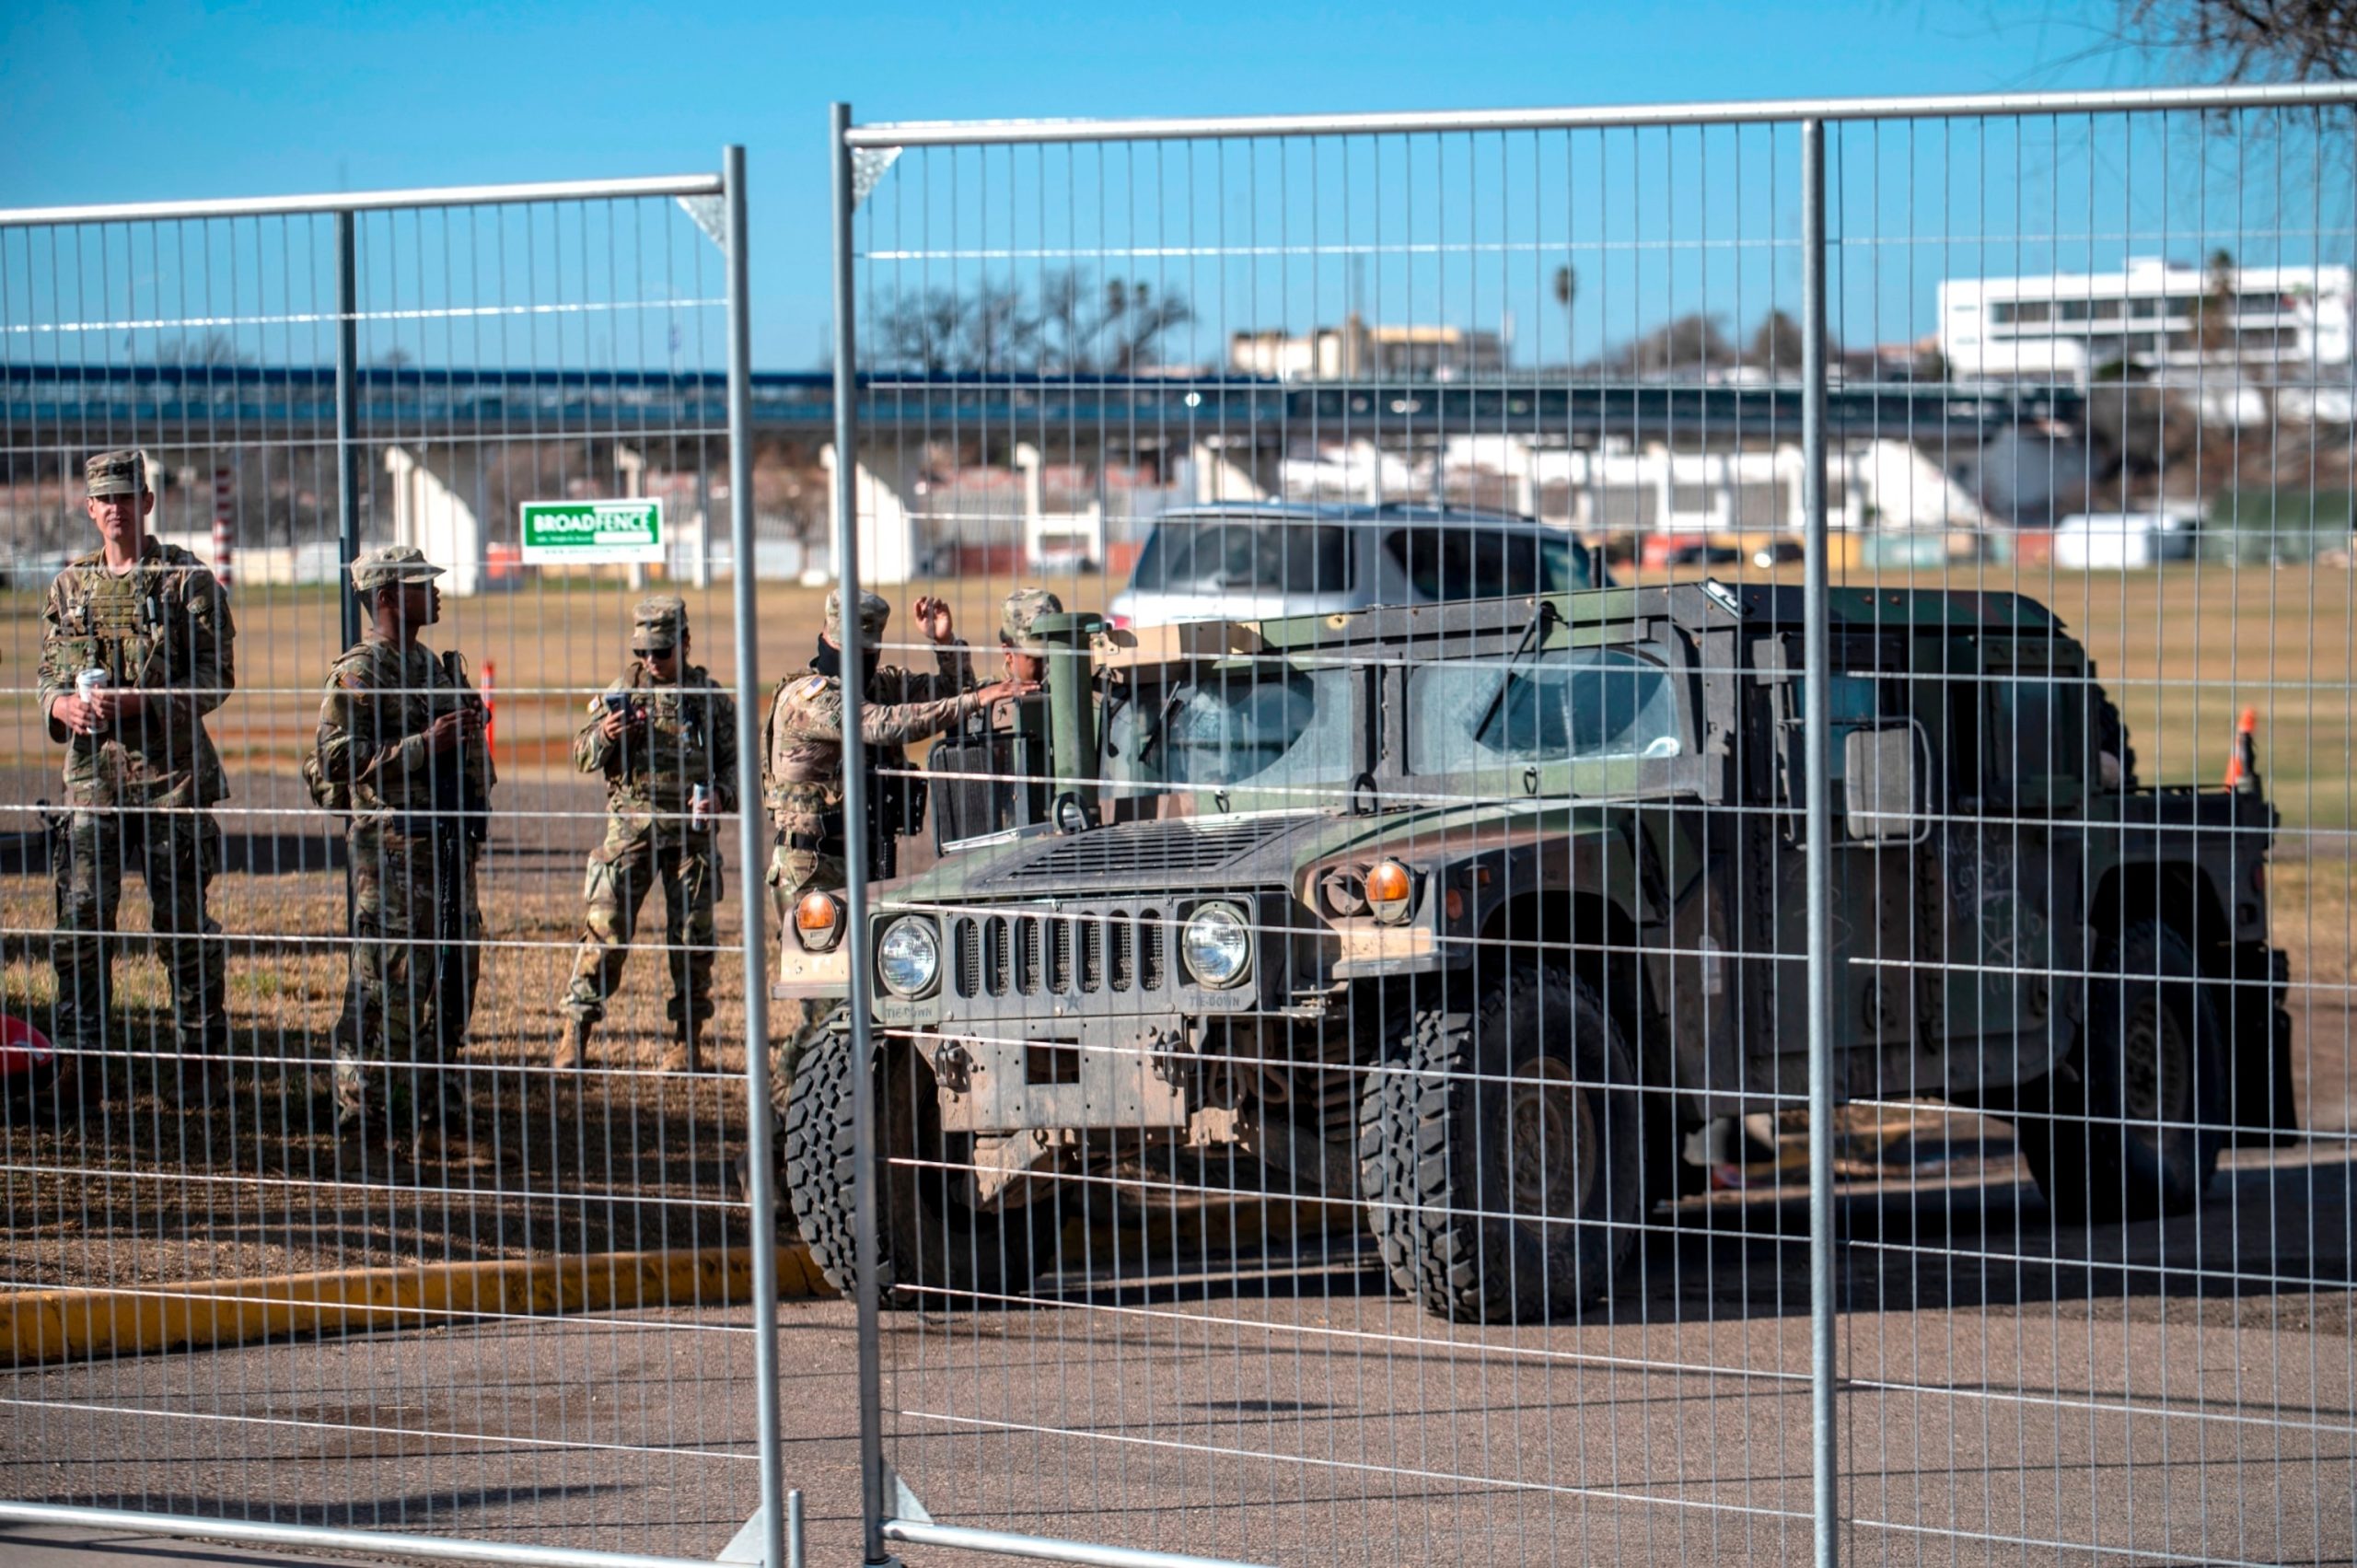 Governor Abbott reveals plans for new military base at the border in Eagle Pass, Texas